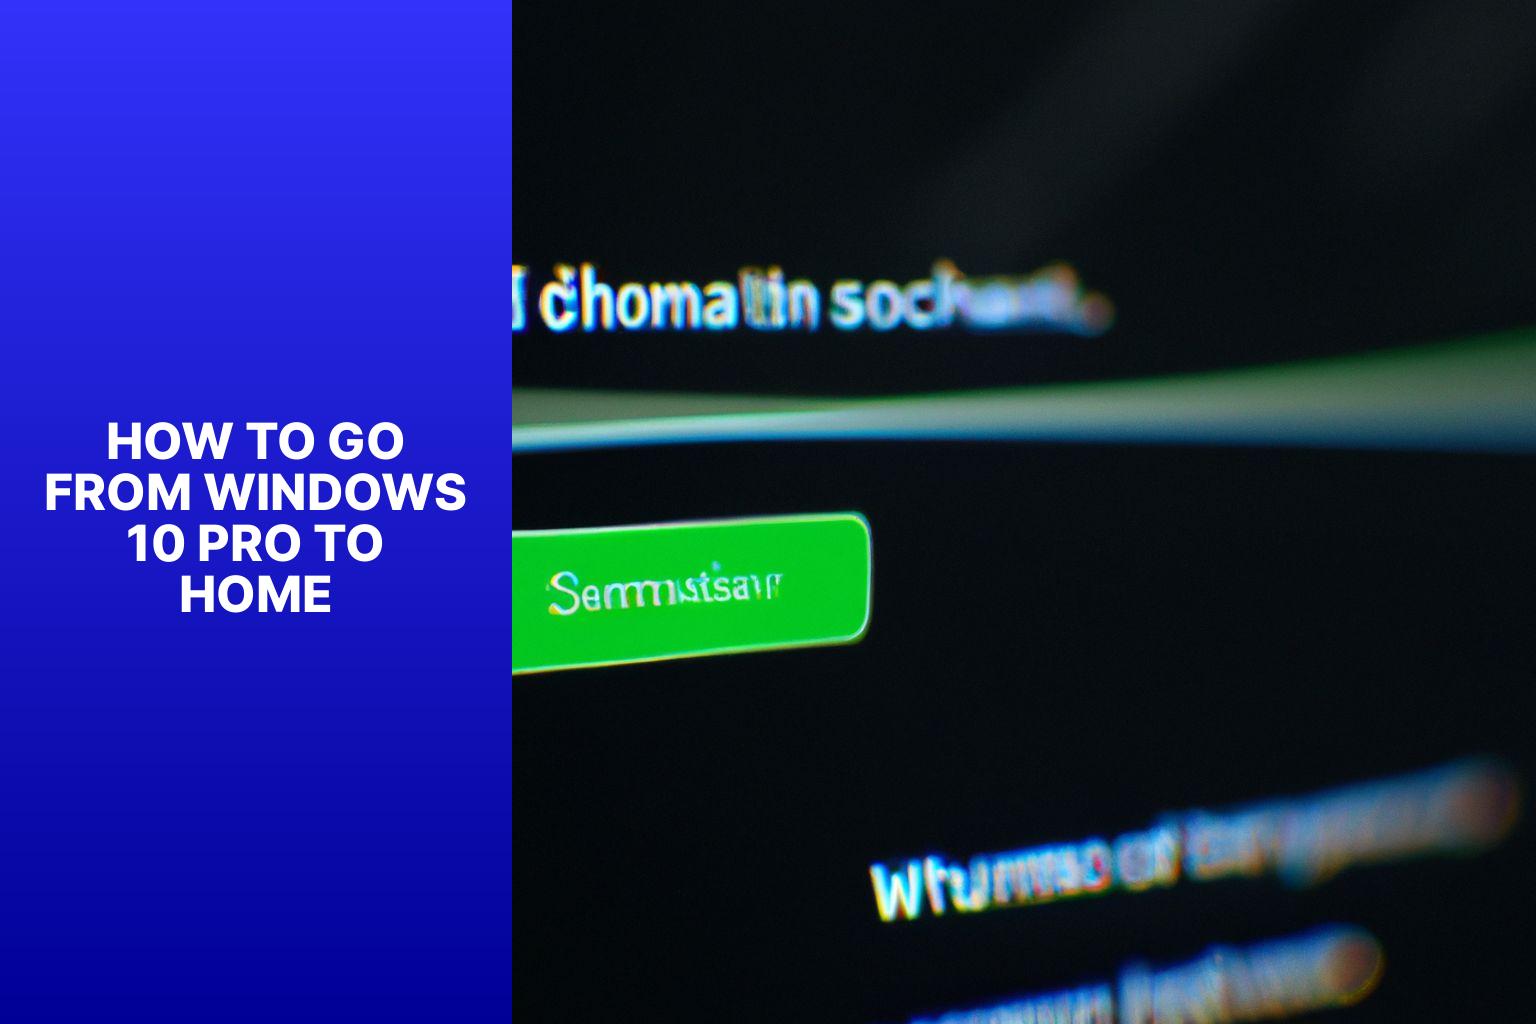 win 11 shutdown tips how to go from windows 10 pro to home4bpz